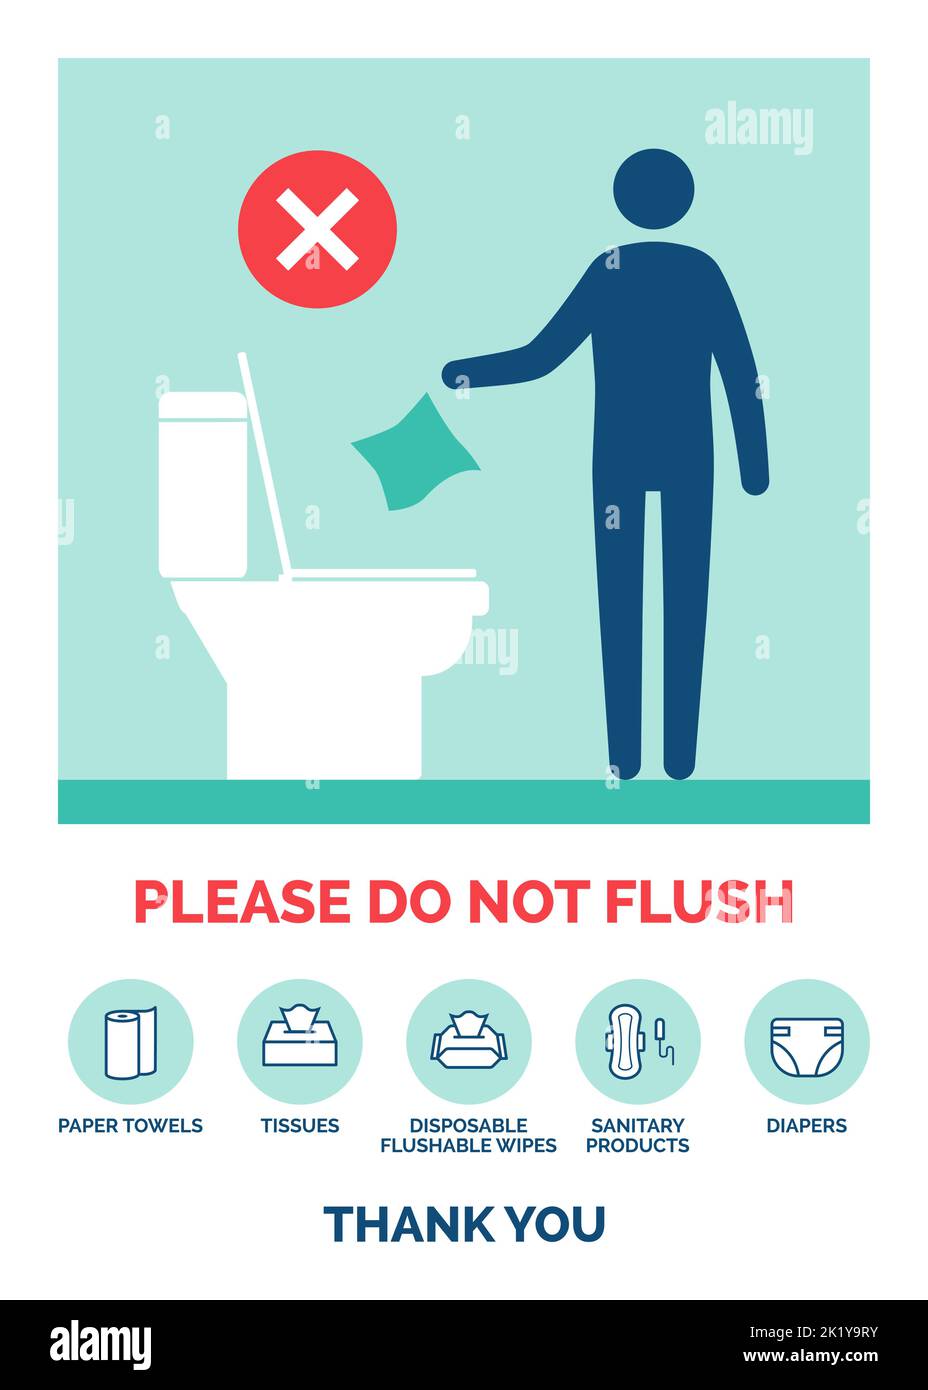 Do not flush sanitary products, wet wipes, paper towels or diapers vector sign Stock Vector